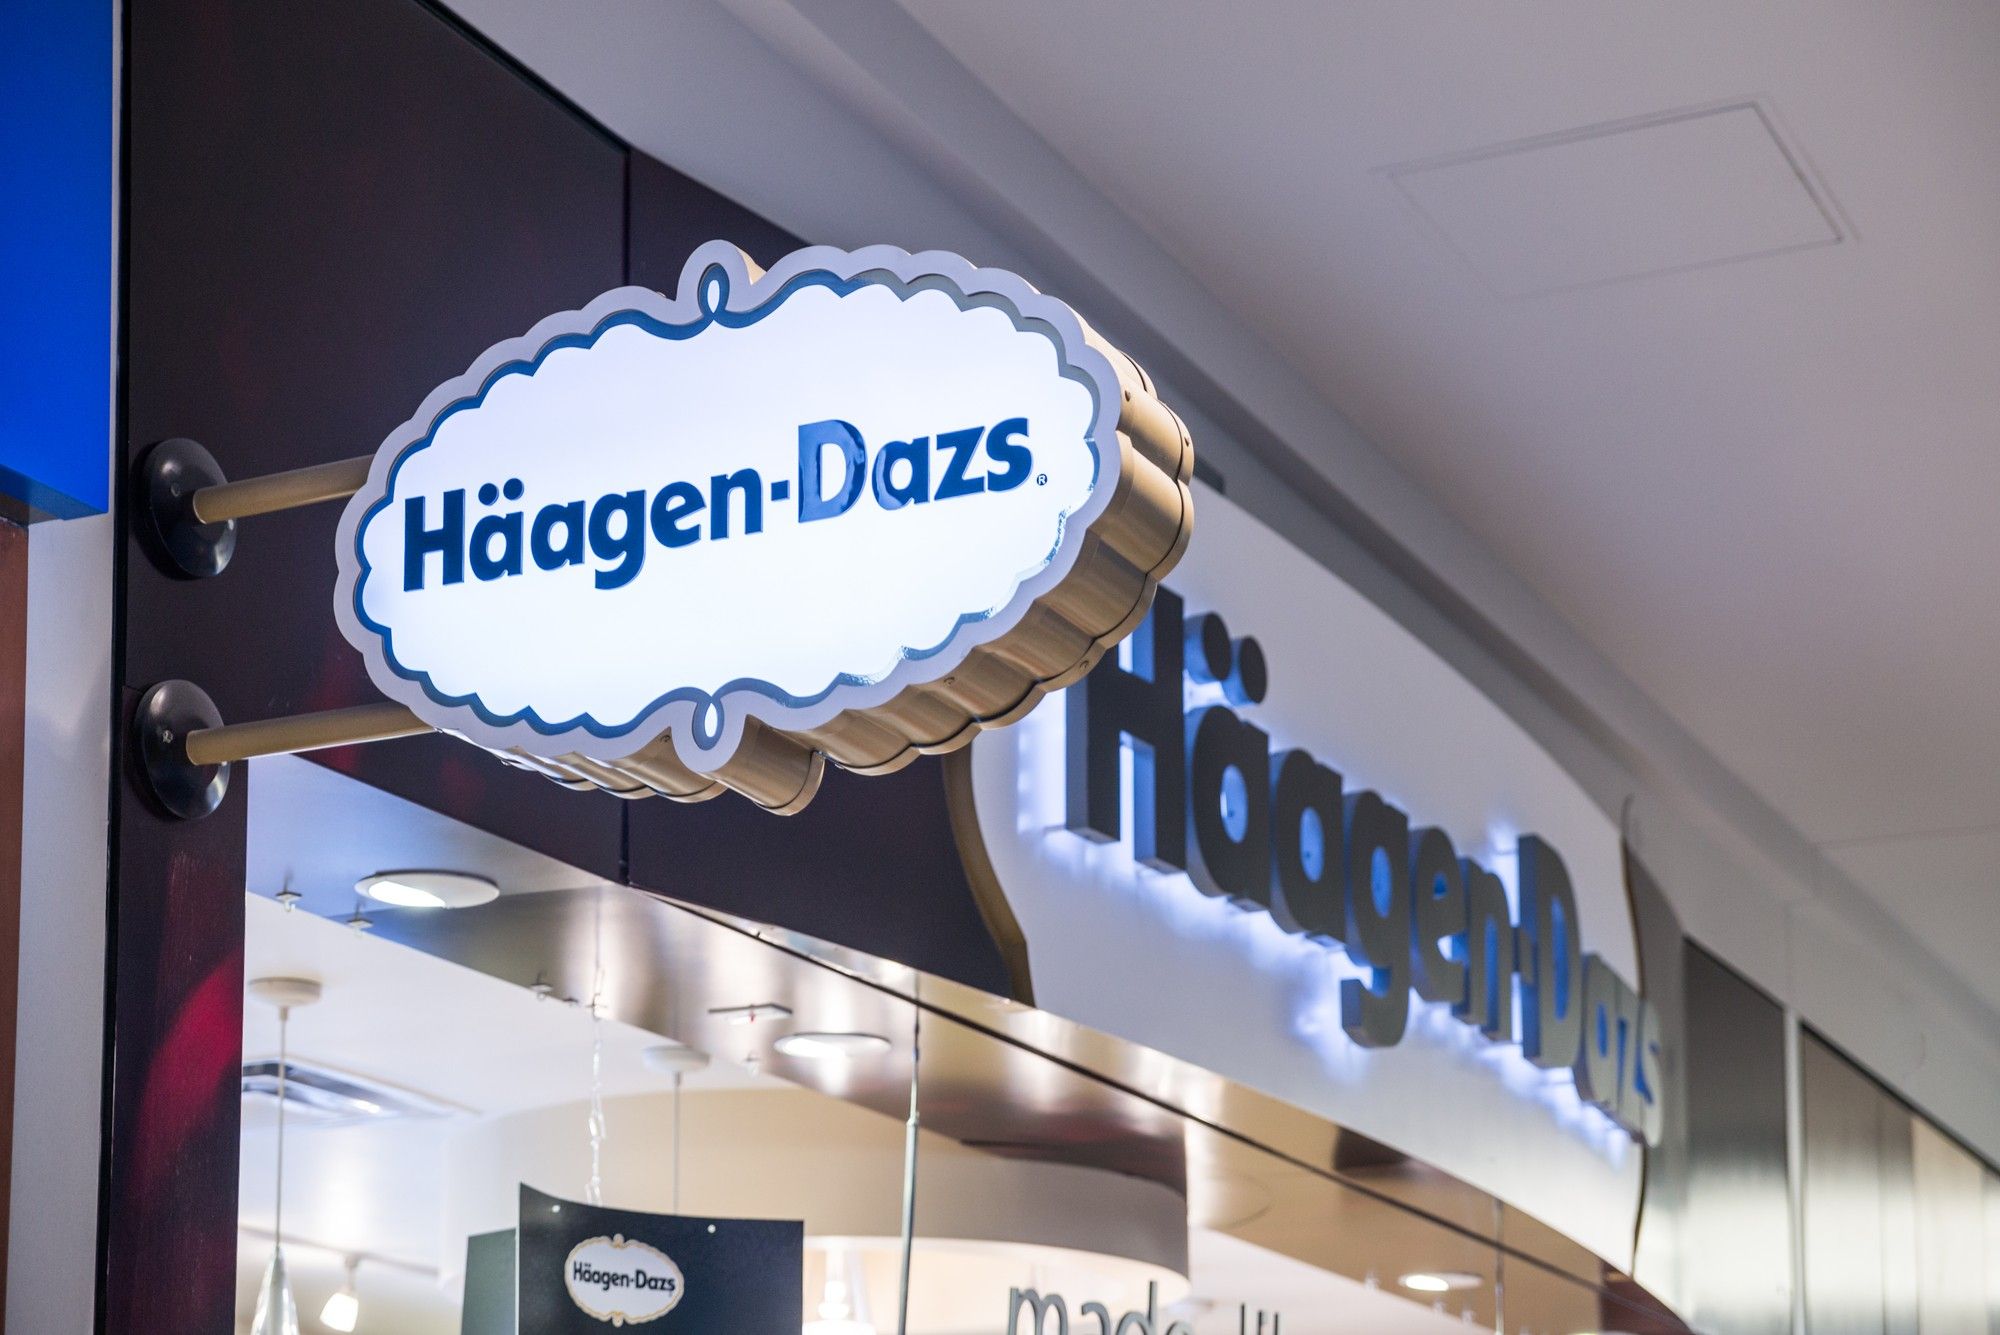 Haagen Dazs chocolate-dipped ice cream bars may be mislabeled.